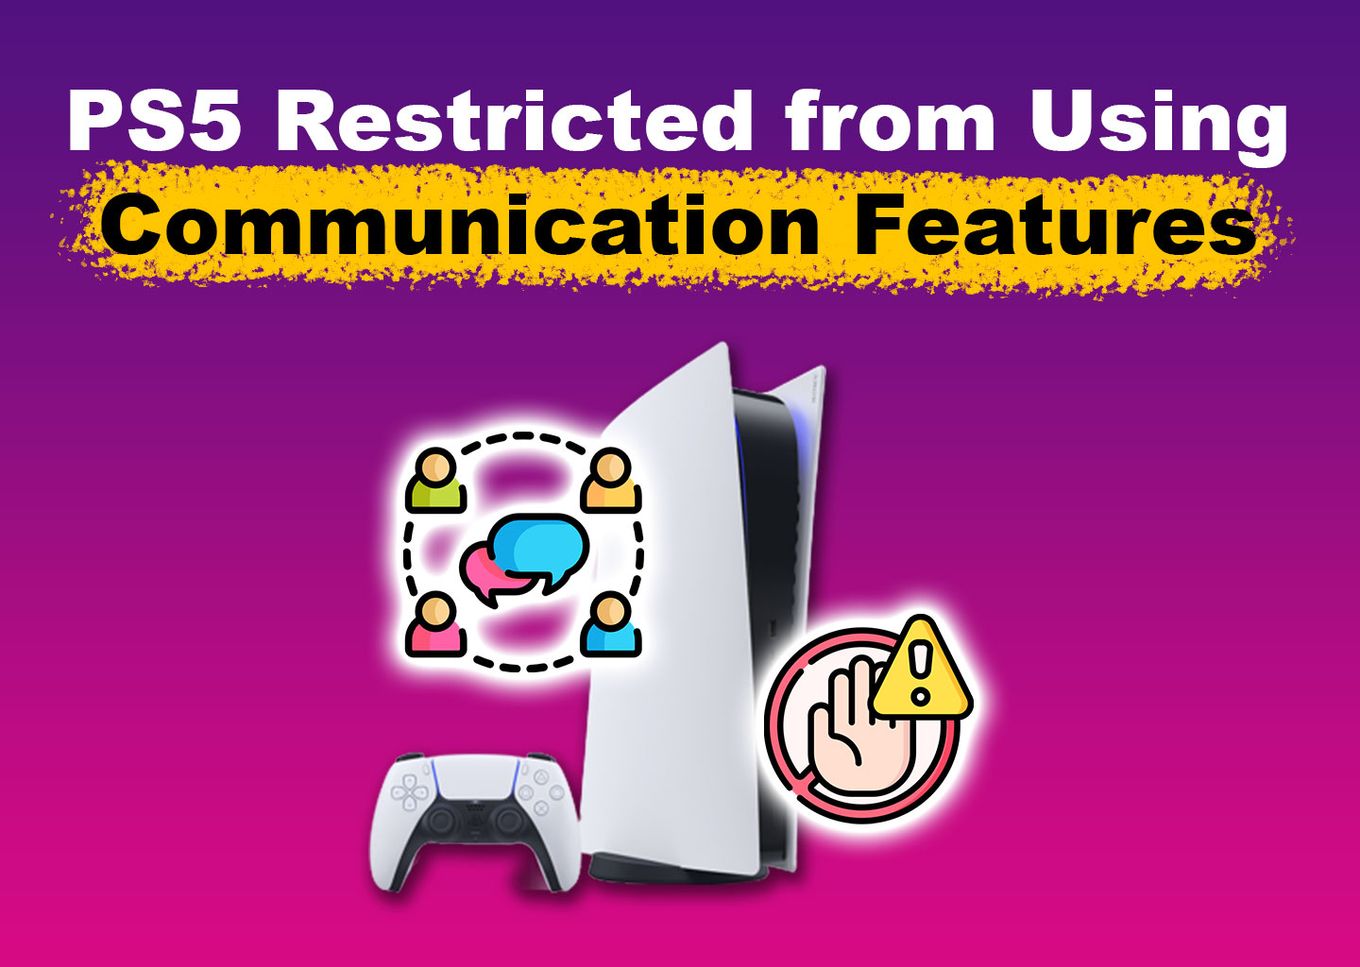 PS5 Restricted from Using Communication Features